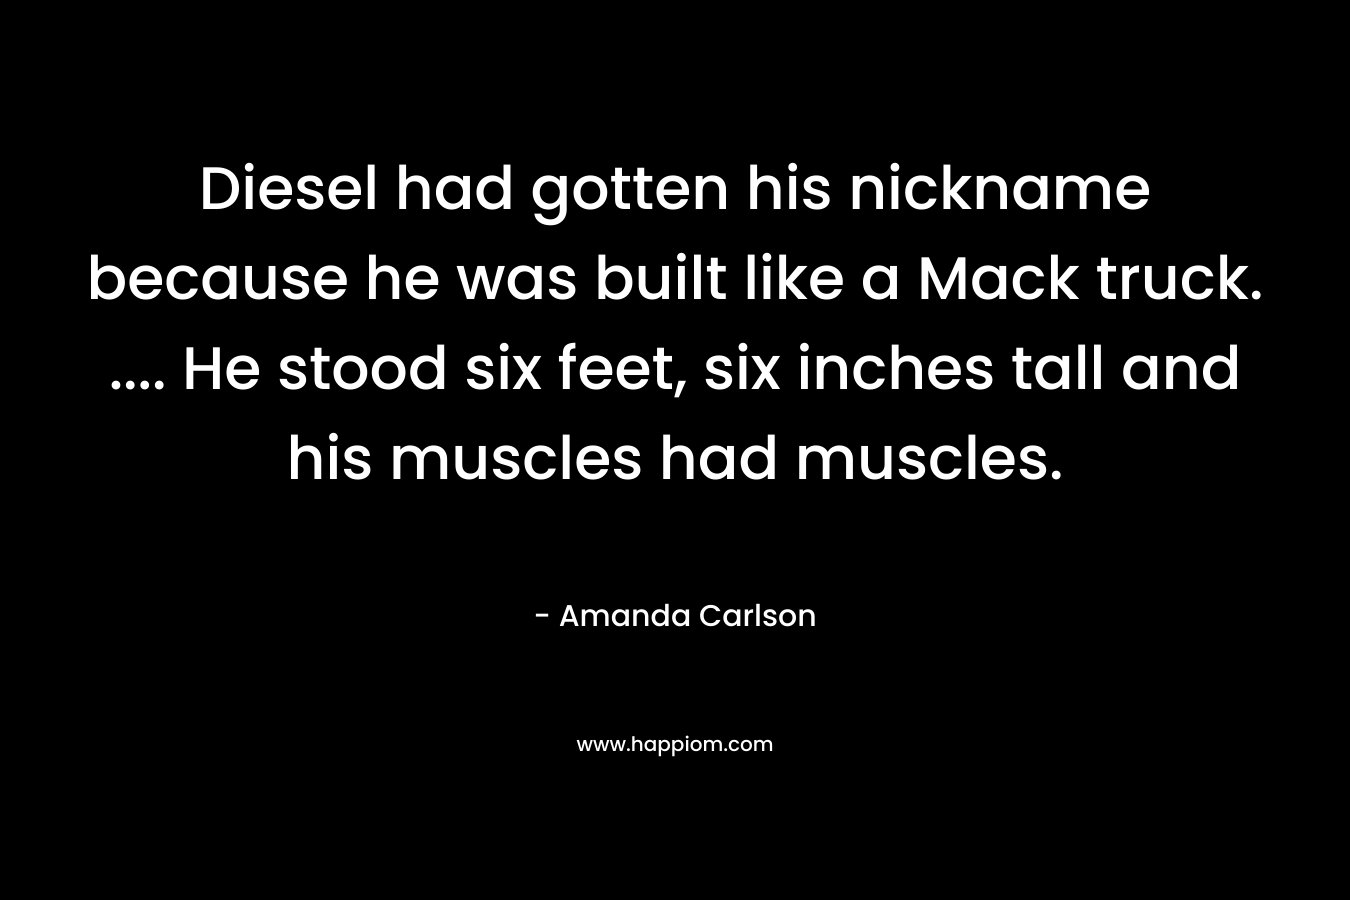 Diesel had gotten his nickname because he was built like a Mack truck. .... He stood six feet, six inches tall and his muscles had muscles.